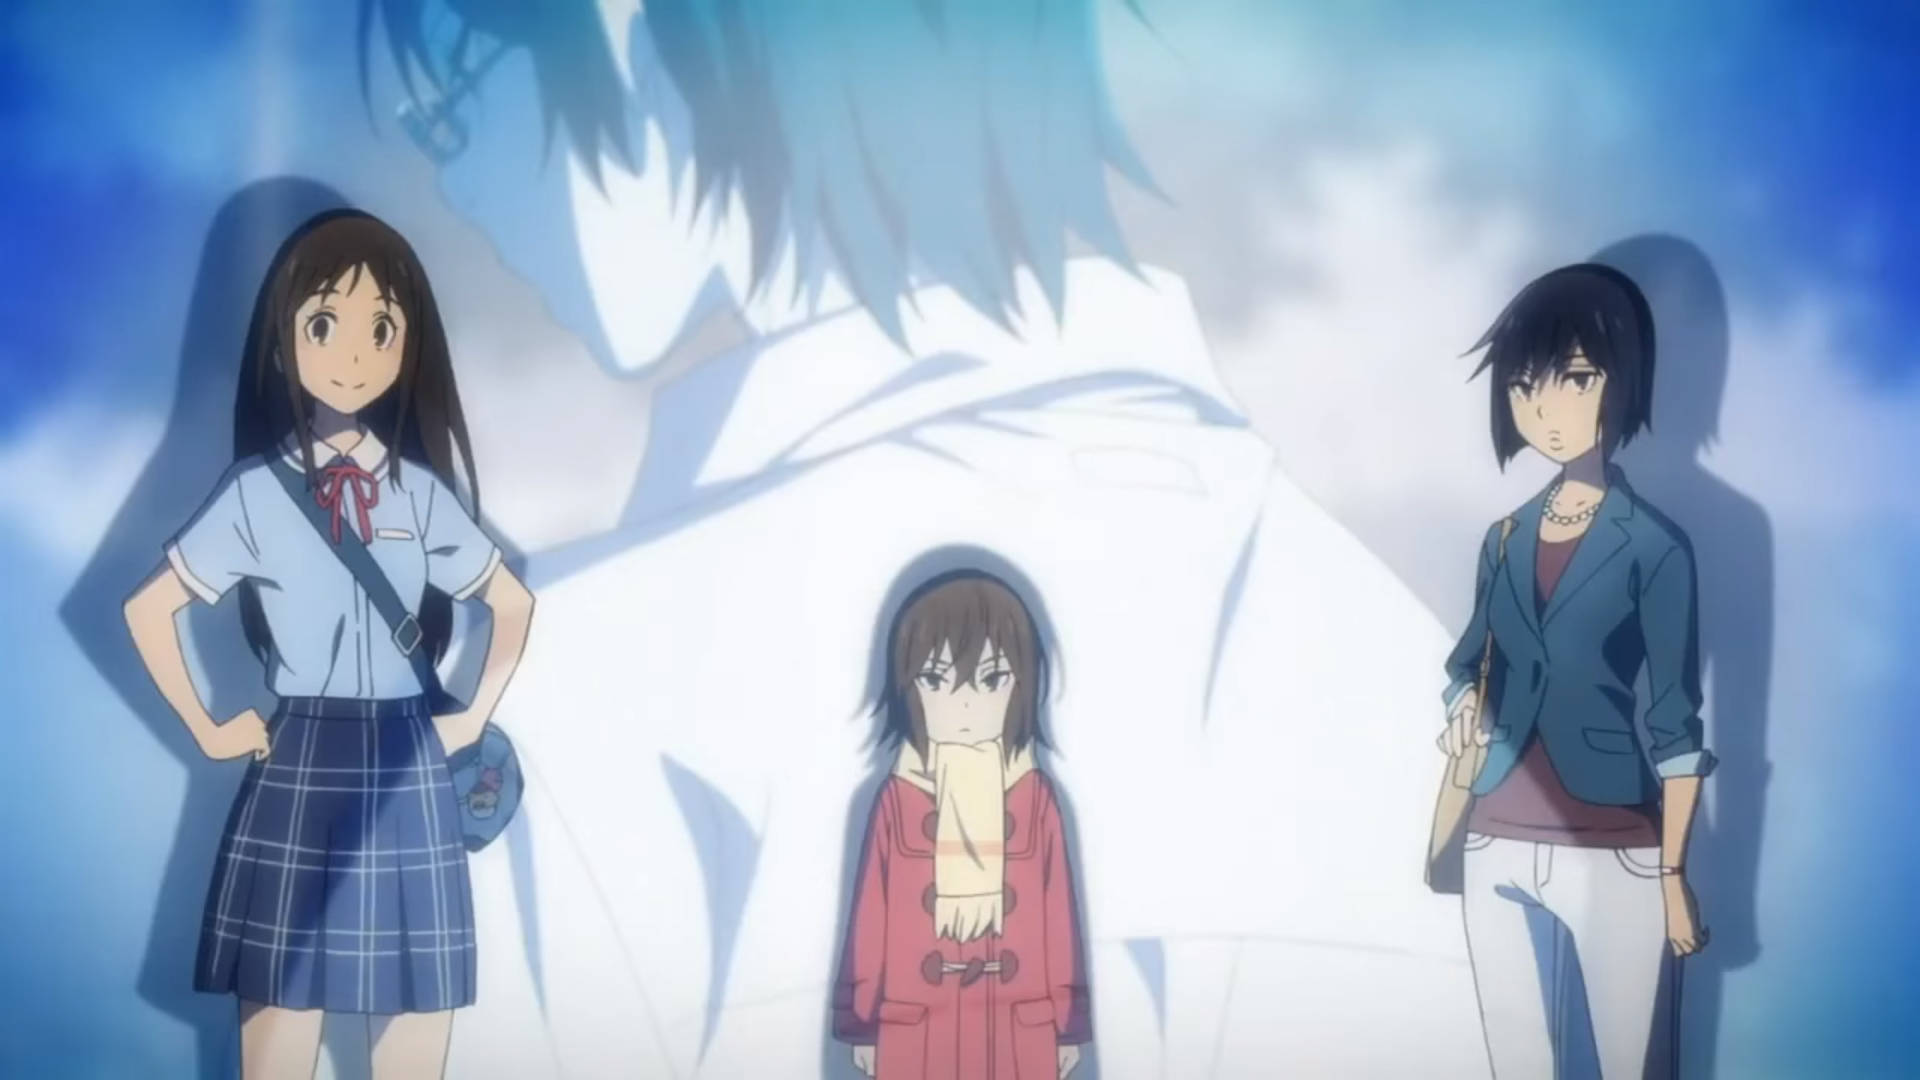 The Three Girls In Erased